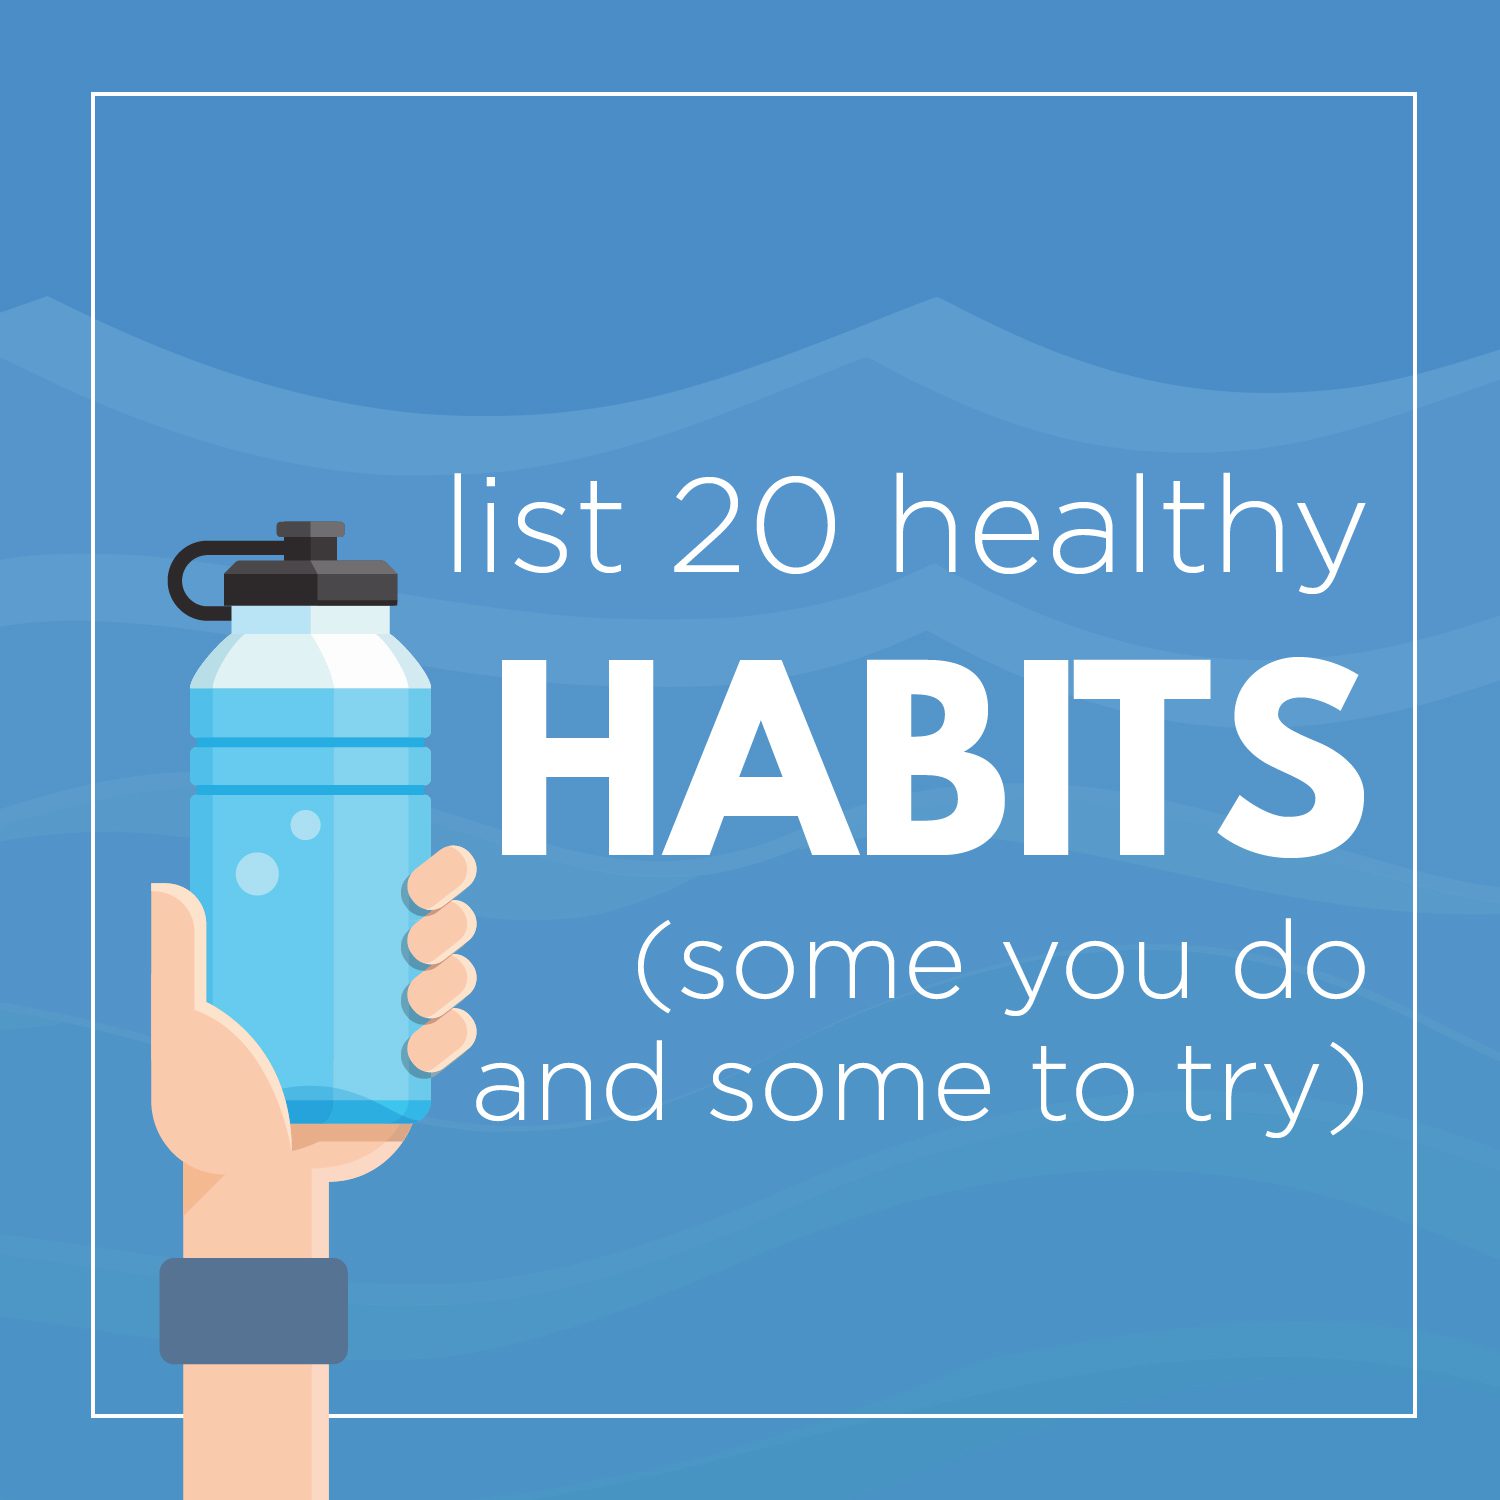 List 20 healthy habits (some you do and some to try)